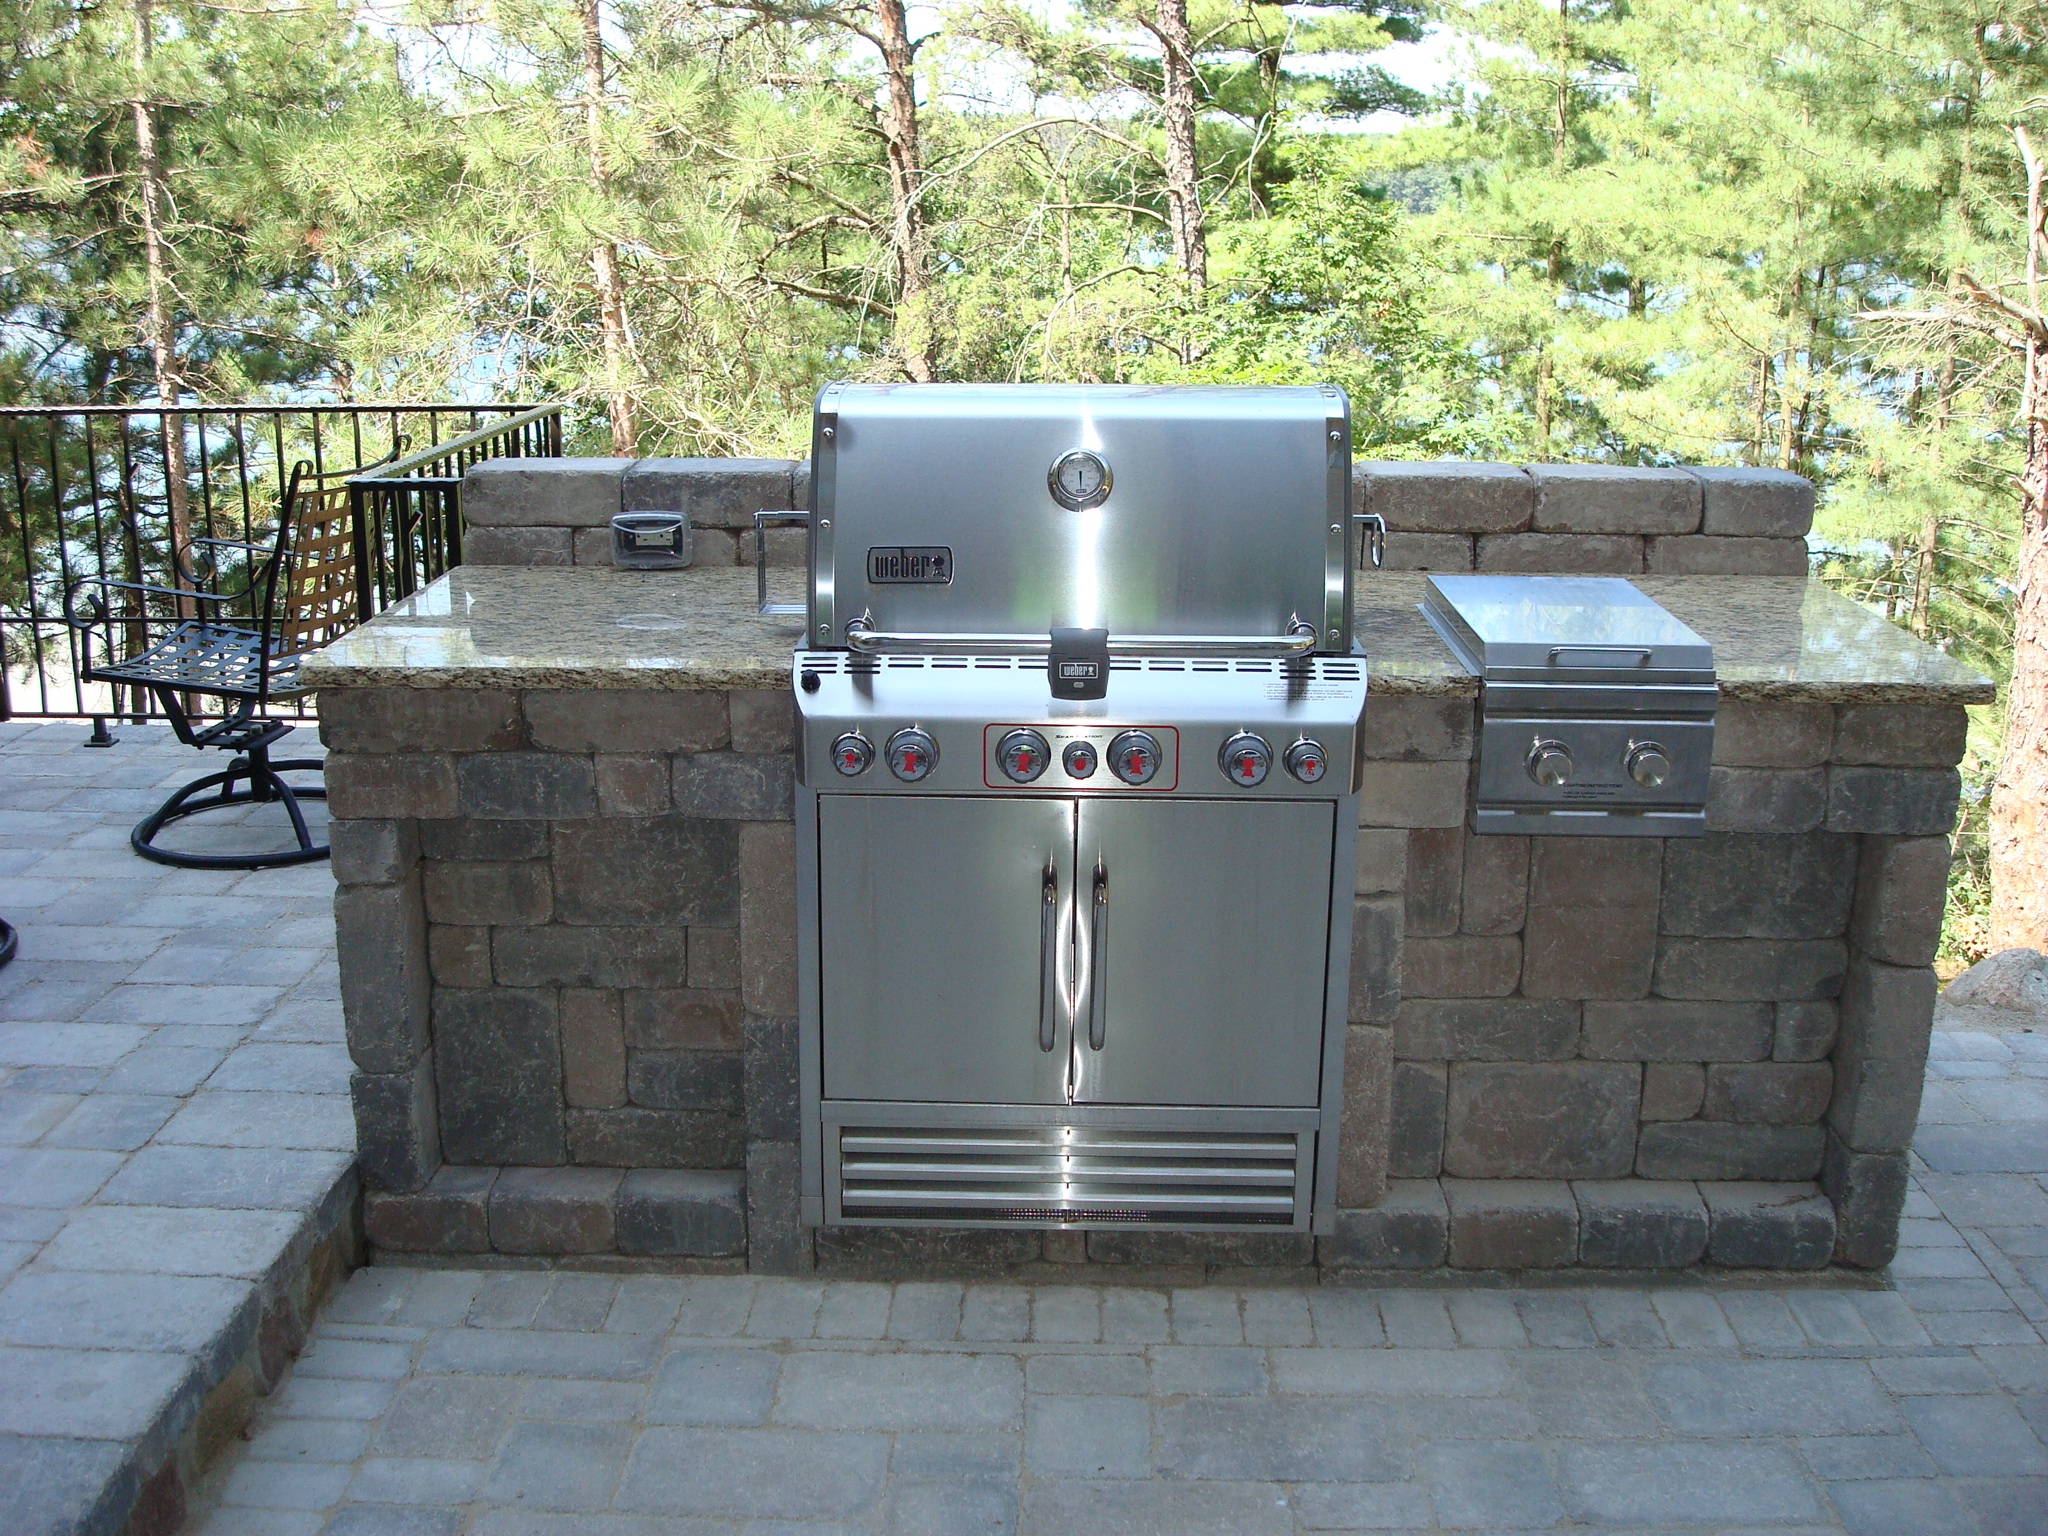 grill in outdoor kitchen area overlook patio and woods